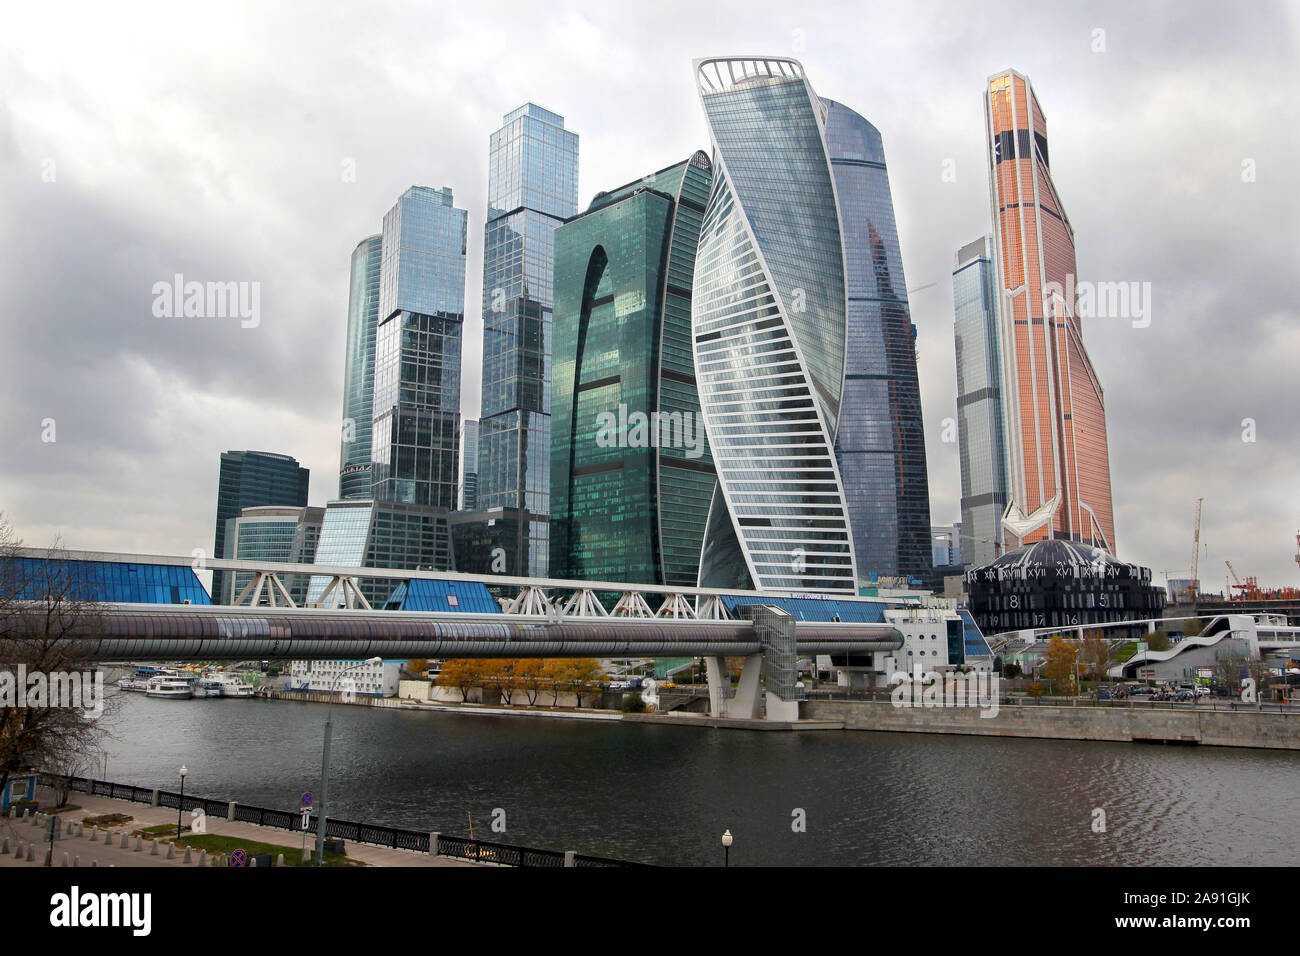 Russia, Moscow. The Moscow International Business Center Moskva-City. The Financial Times daily informed, citing the Global Witness non-governmental organization, that relatives of Syrian President Bashar al-Assad had purchased about 20 apartments in Moscow’s skyscraper district Moskva-City. The article notes that the total value of property bought in the period from 2013 to 2019 comes up to $40 mln, adding that the apartments were purchased through offshore Lebanese enterprises. Stock Photo